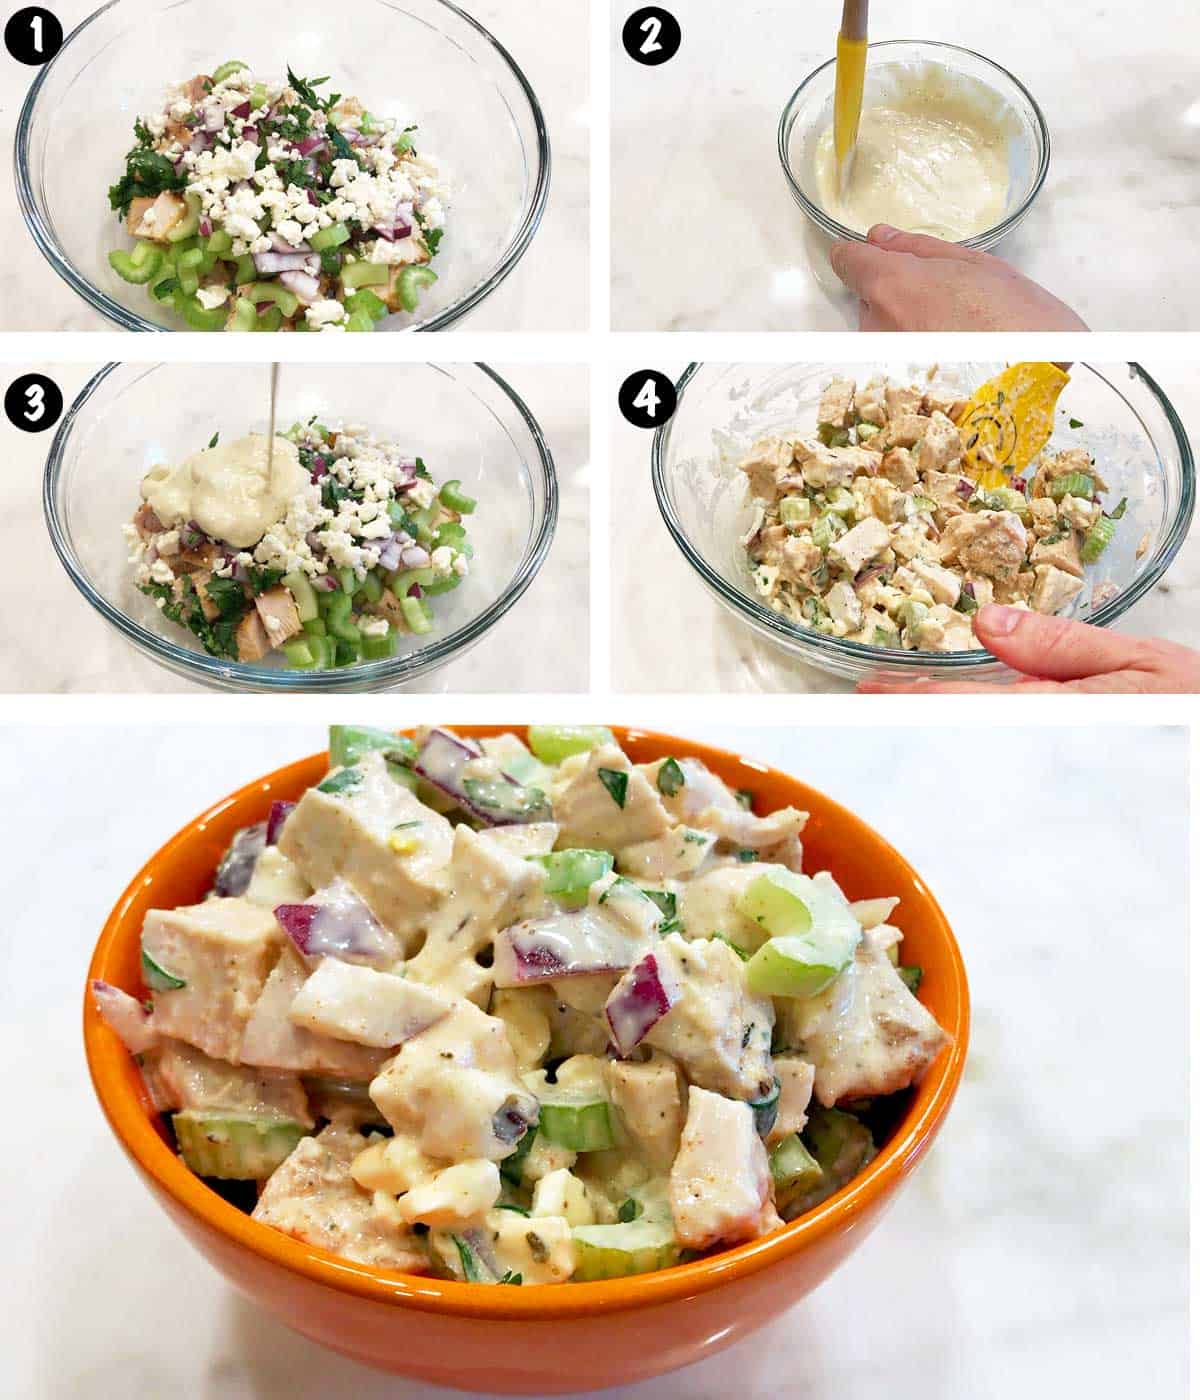 A five-photo collage showing the steps for making a turkey salad. 